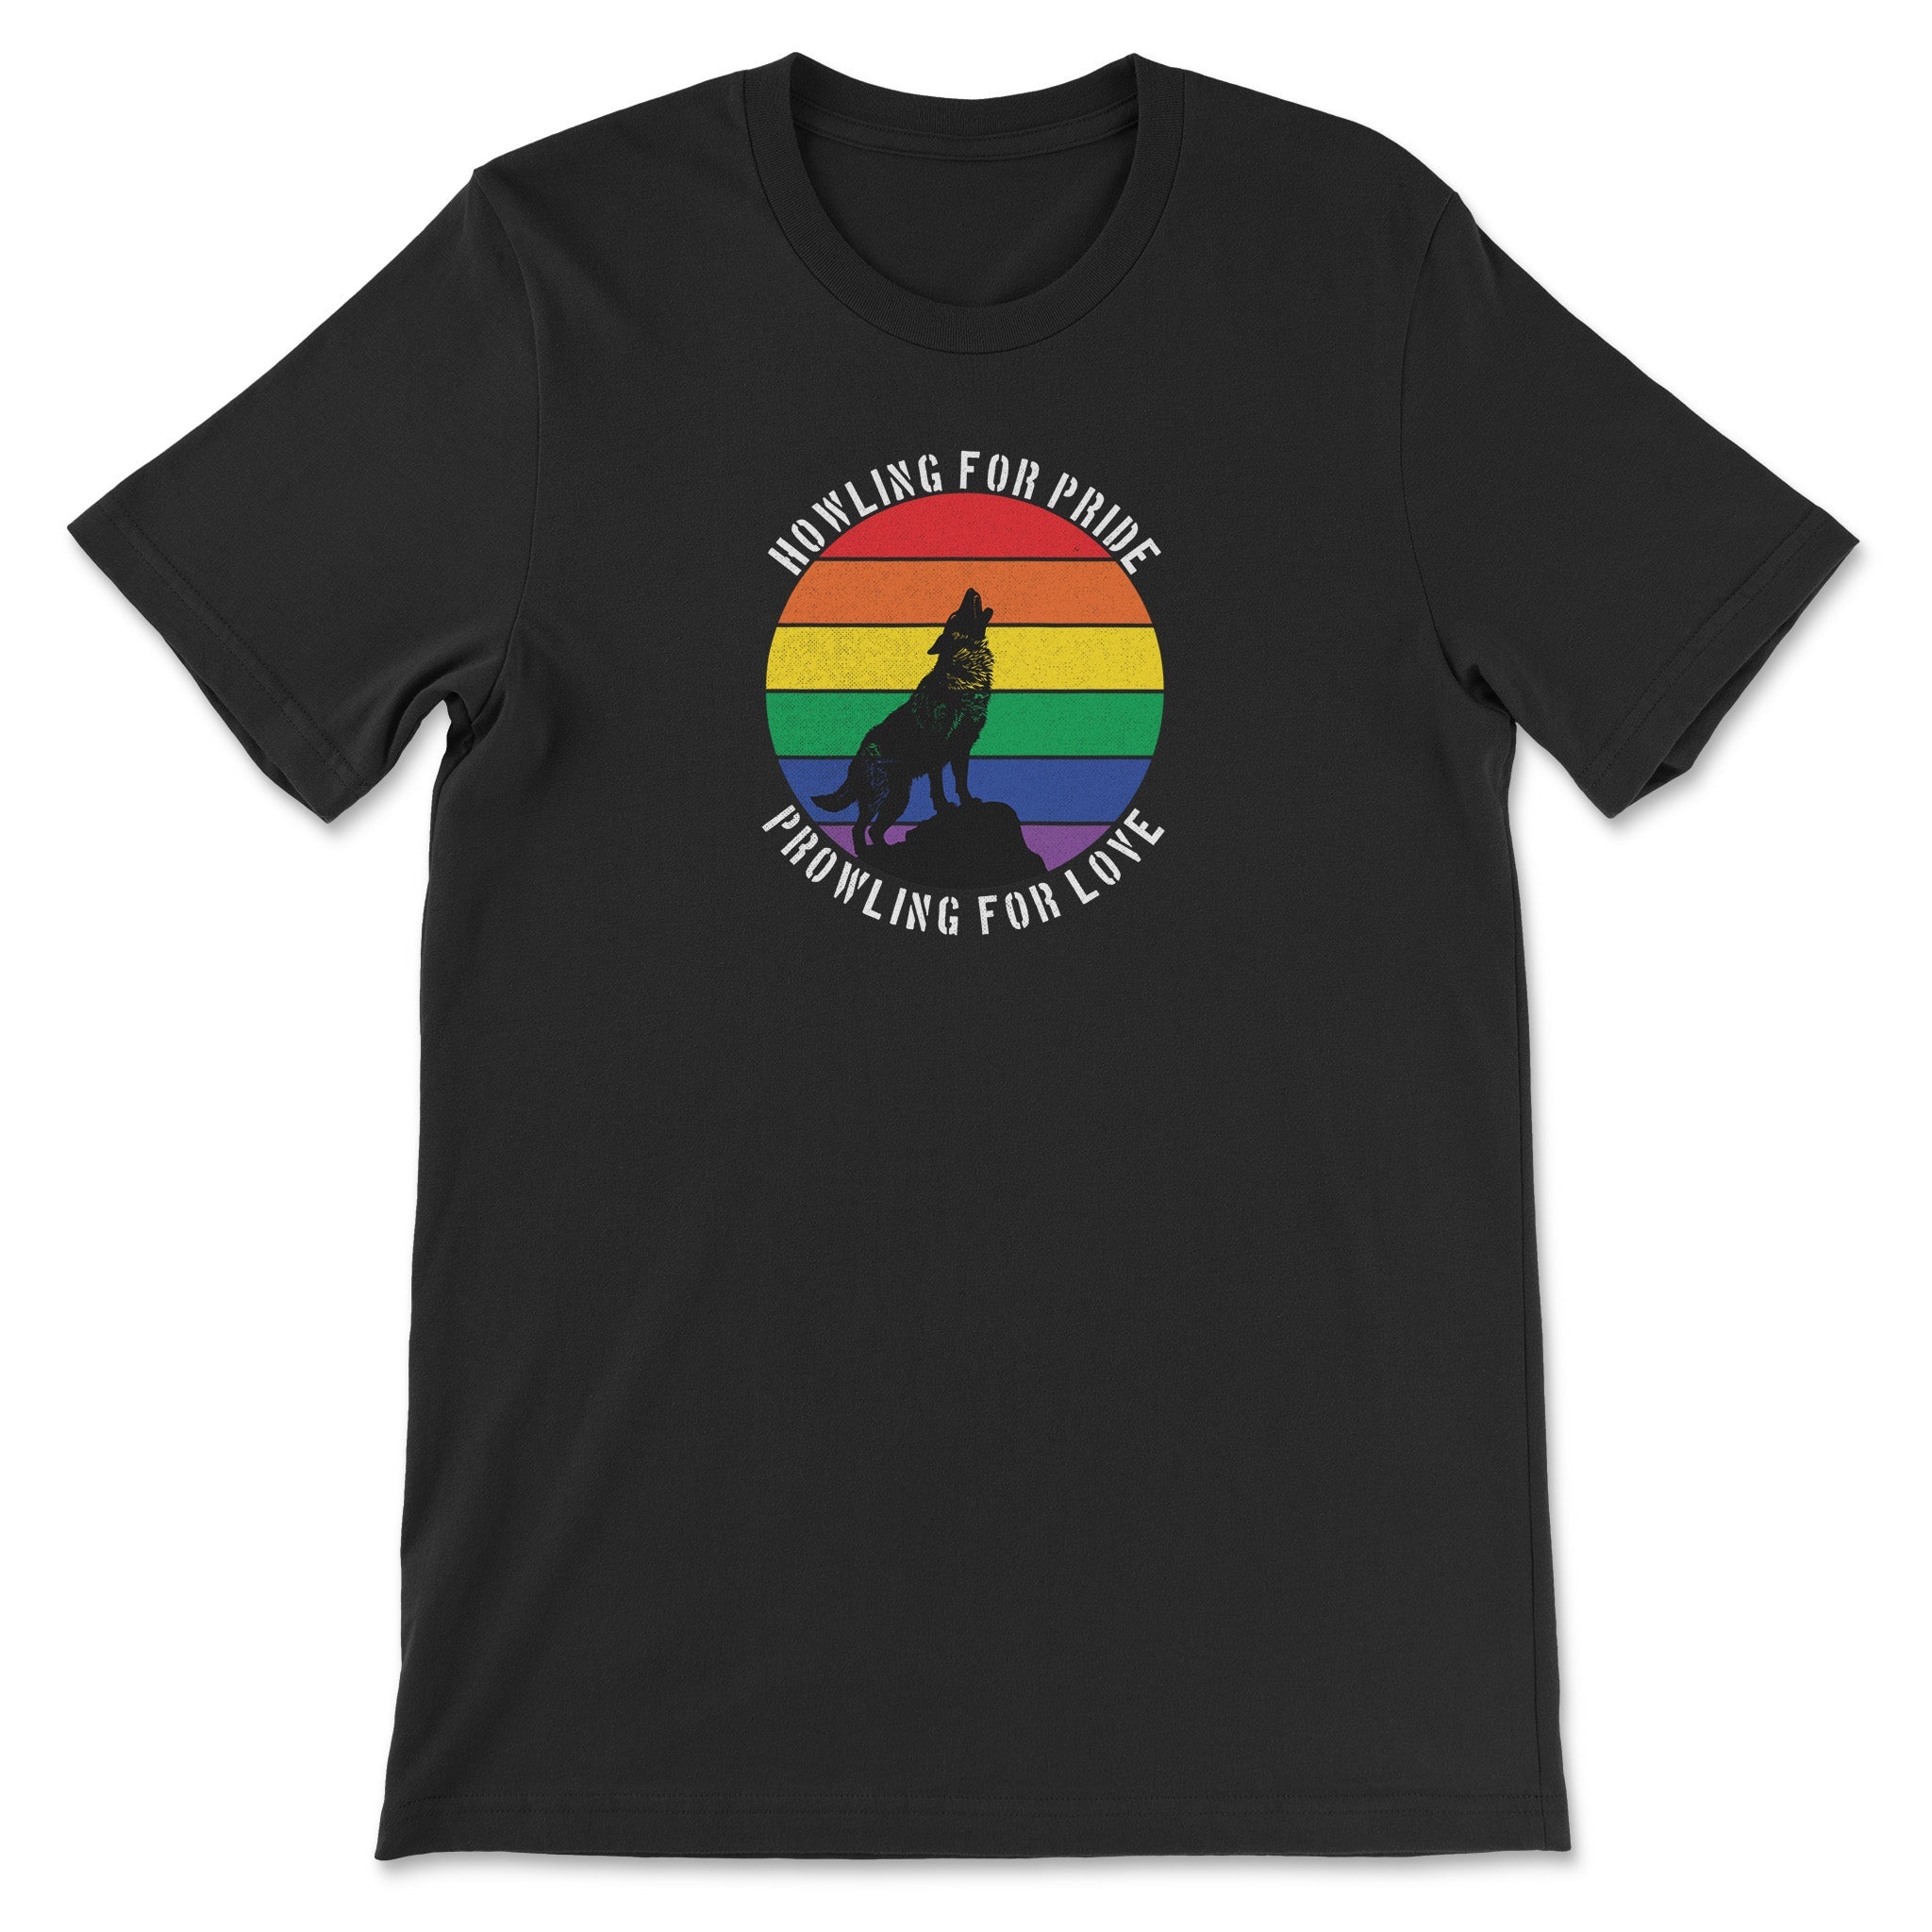 "Howling for Pride, Prowling for Love" T-Shirt - Gay Wolf Pride Statement - Hunky Tops